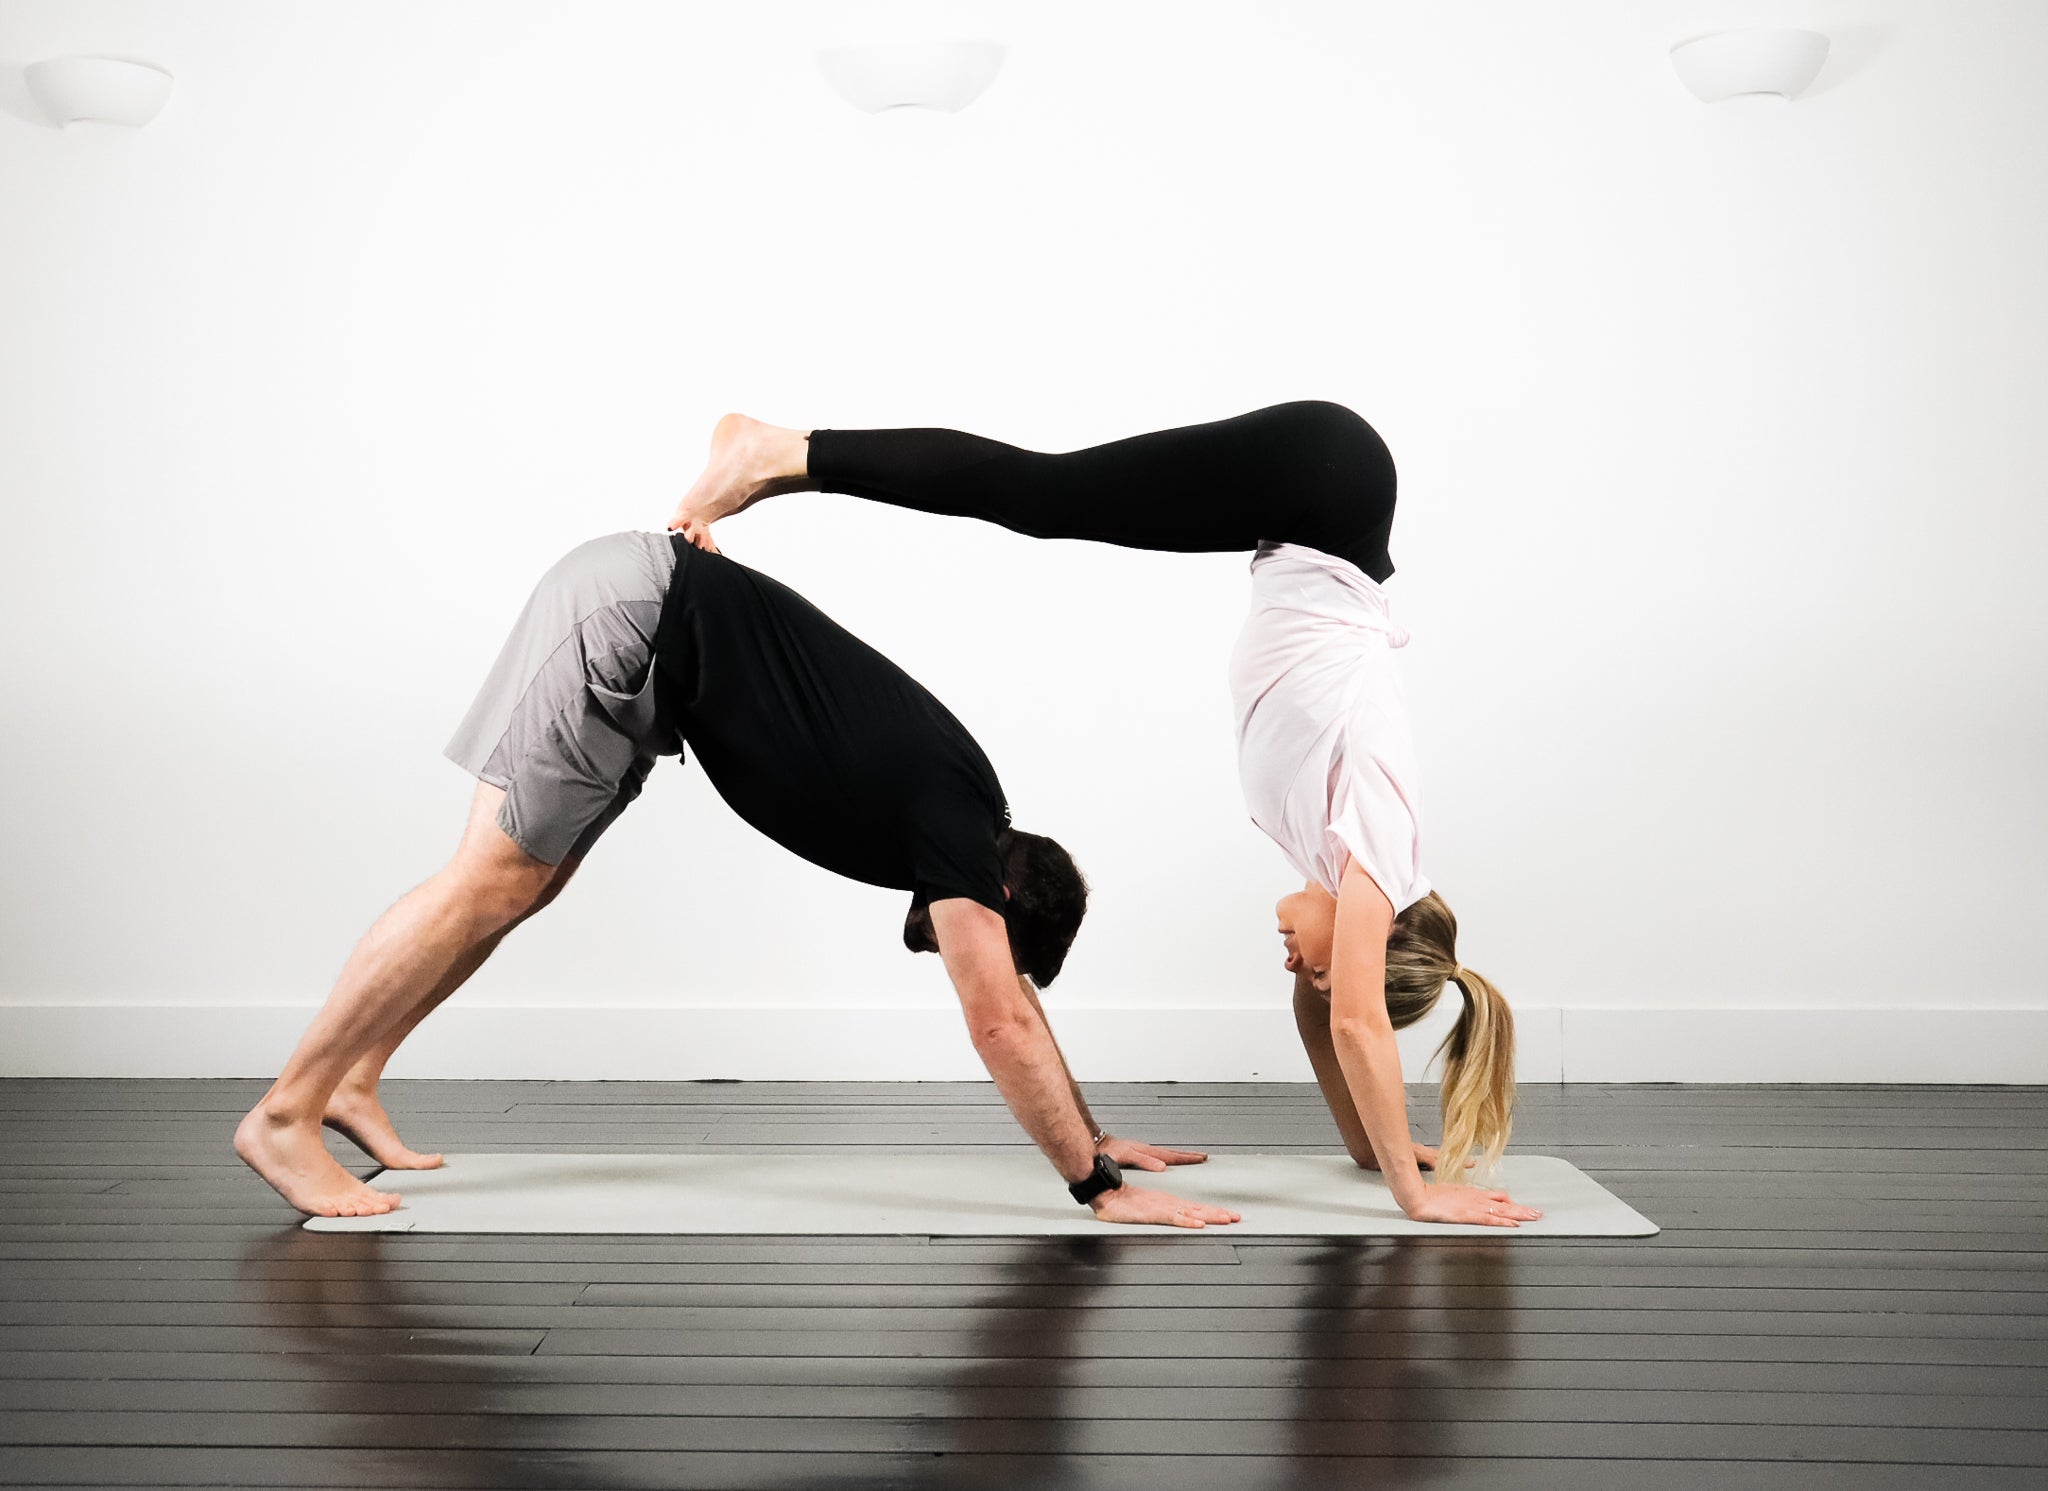 Top 10 Couples Yoga Poses For All Levels